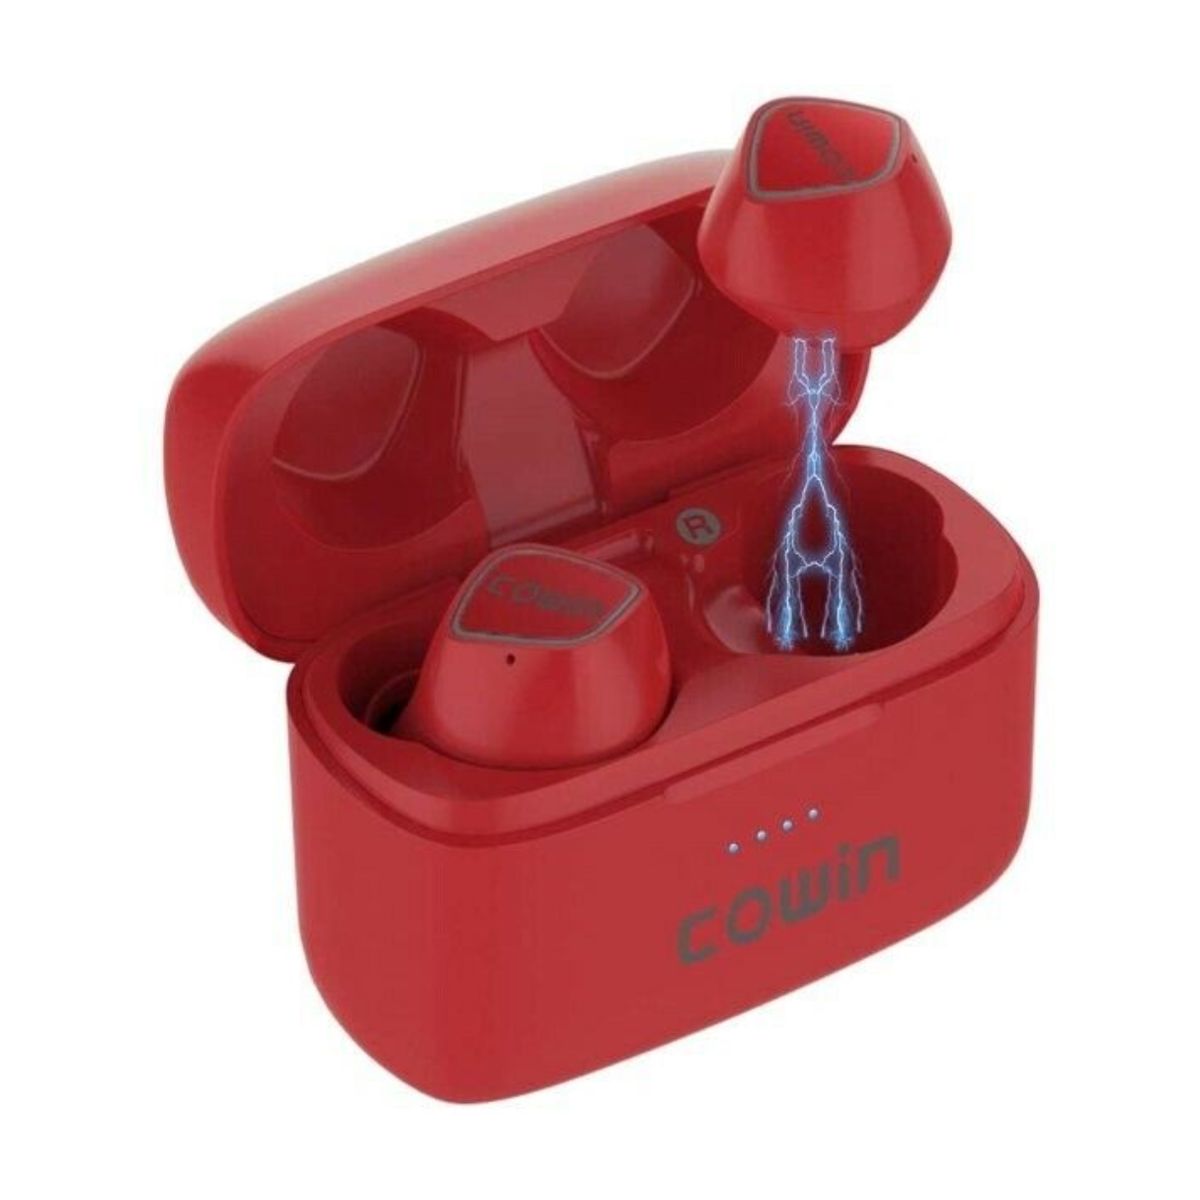 Photos - Headphones Cowin KY02 Wireless Earbuds with Microphone - Red COWKY02RD 